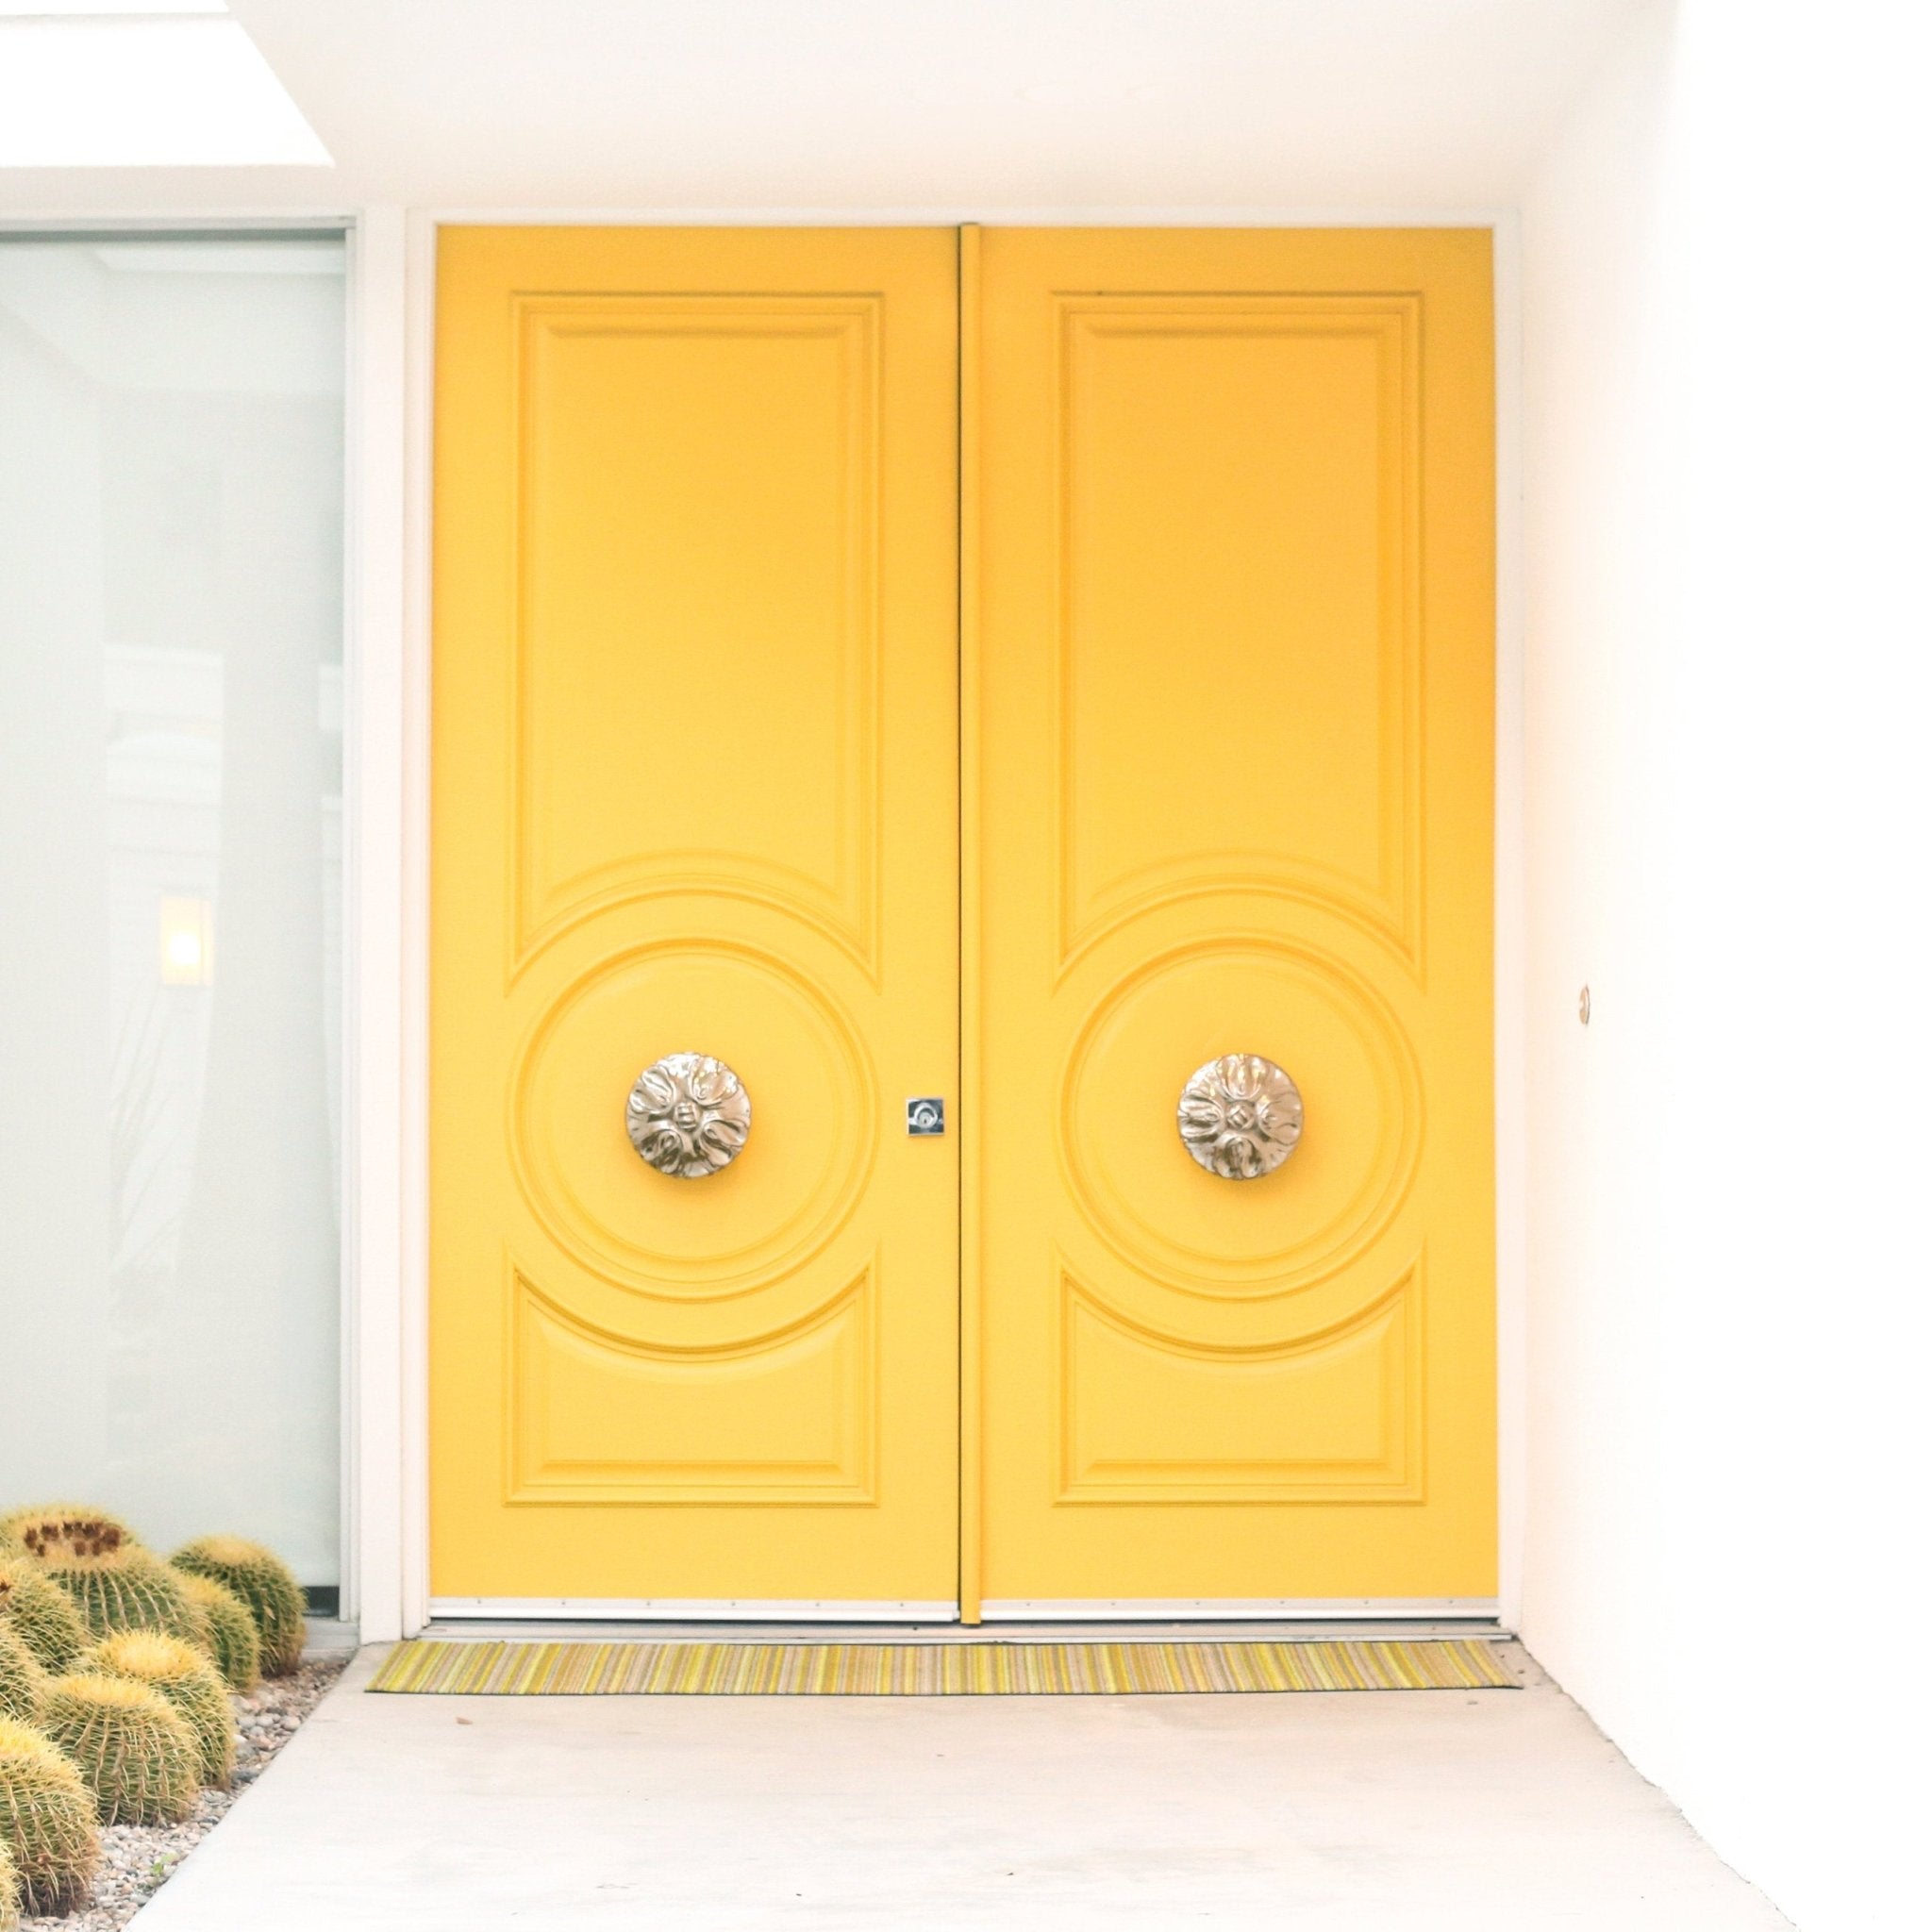 Doors of Palm Springs Photograph by Kelly Segré - Yellow Door of Palm Springs - Destination PSP